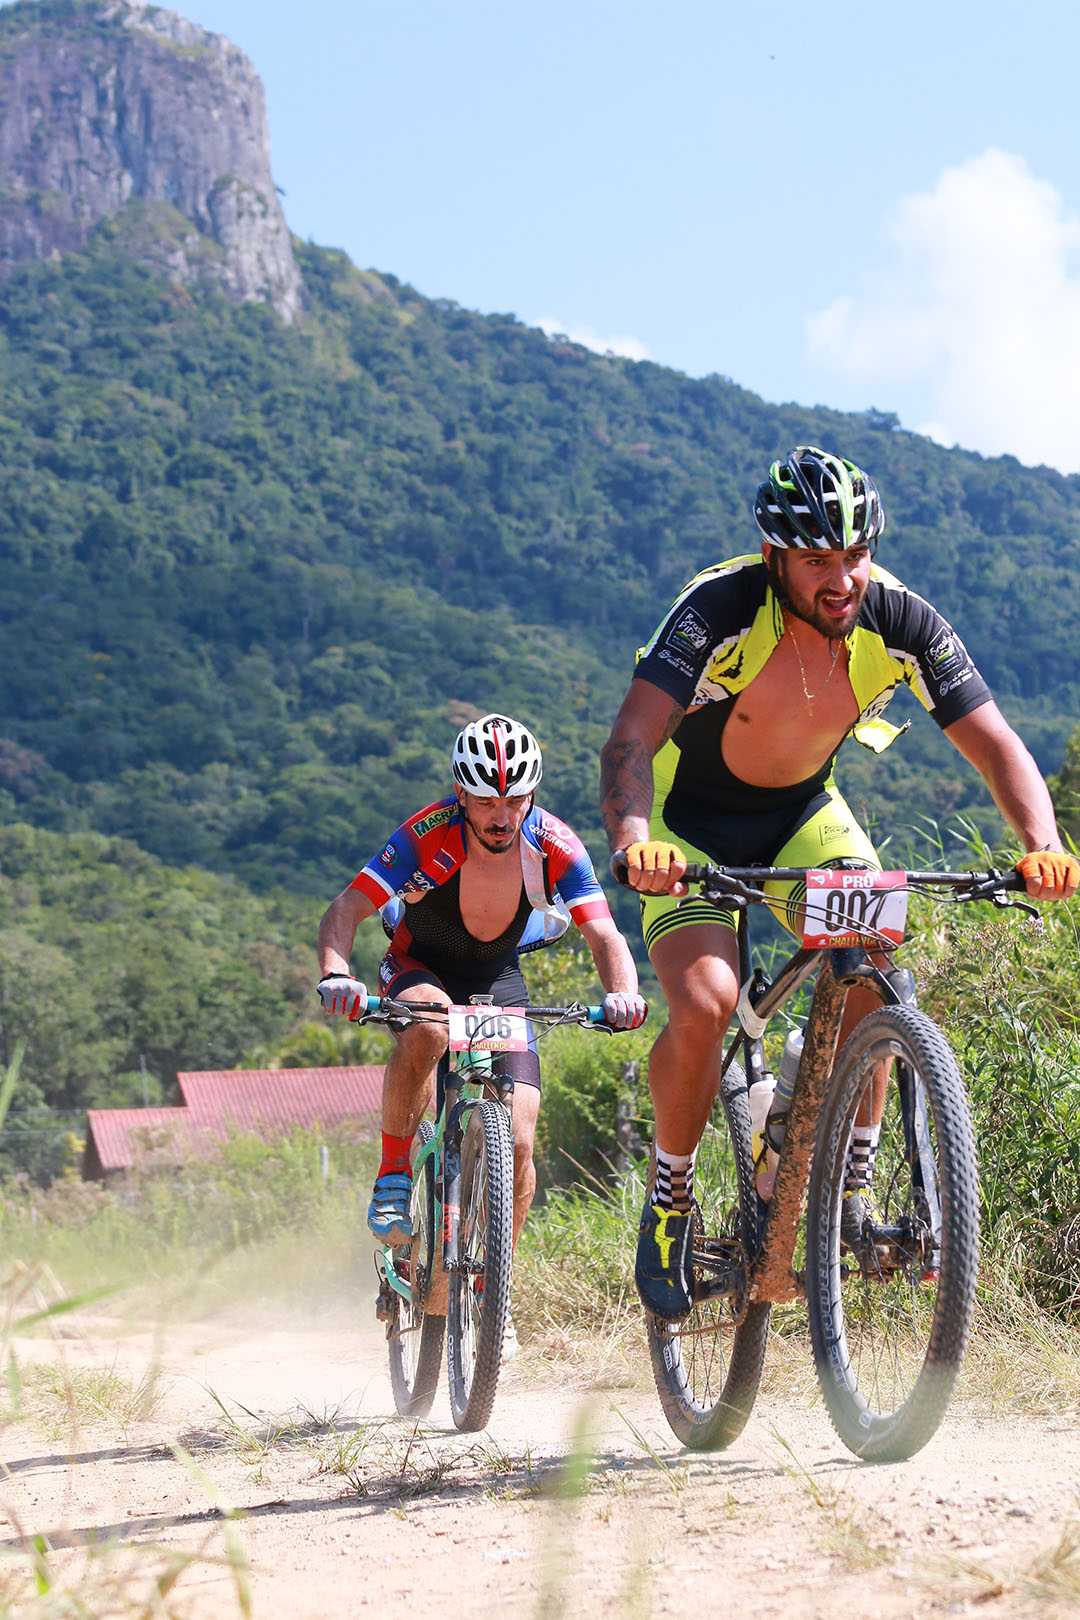 2º CHALLENGE CHAOYANG MOUNTAIN BIKE-PHOTOS BY Vinicius Leyser